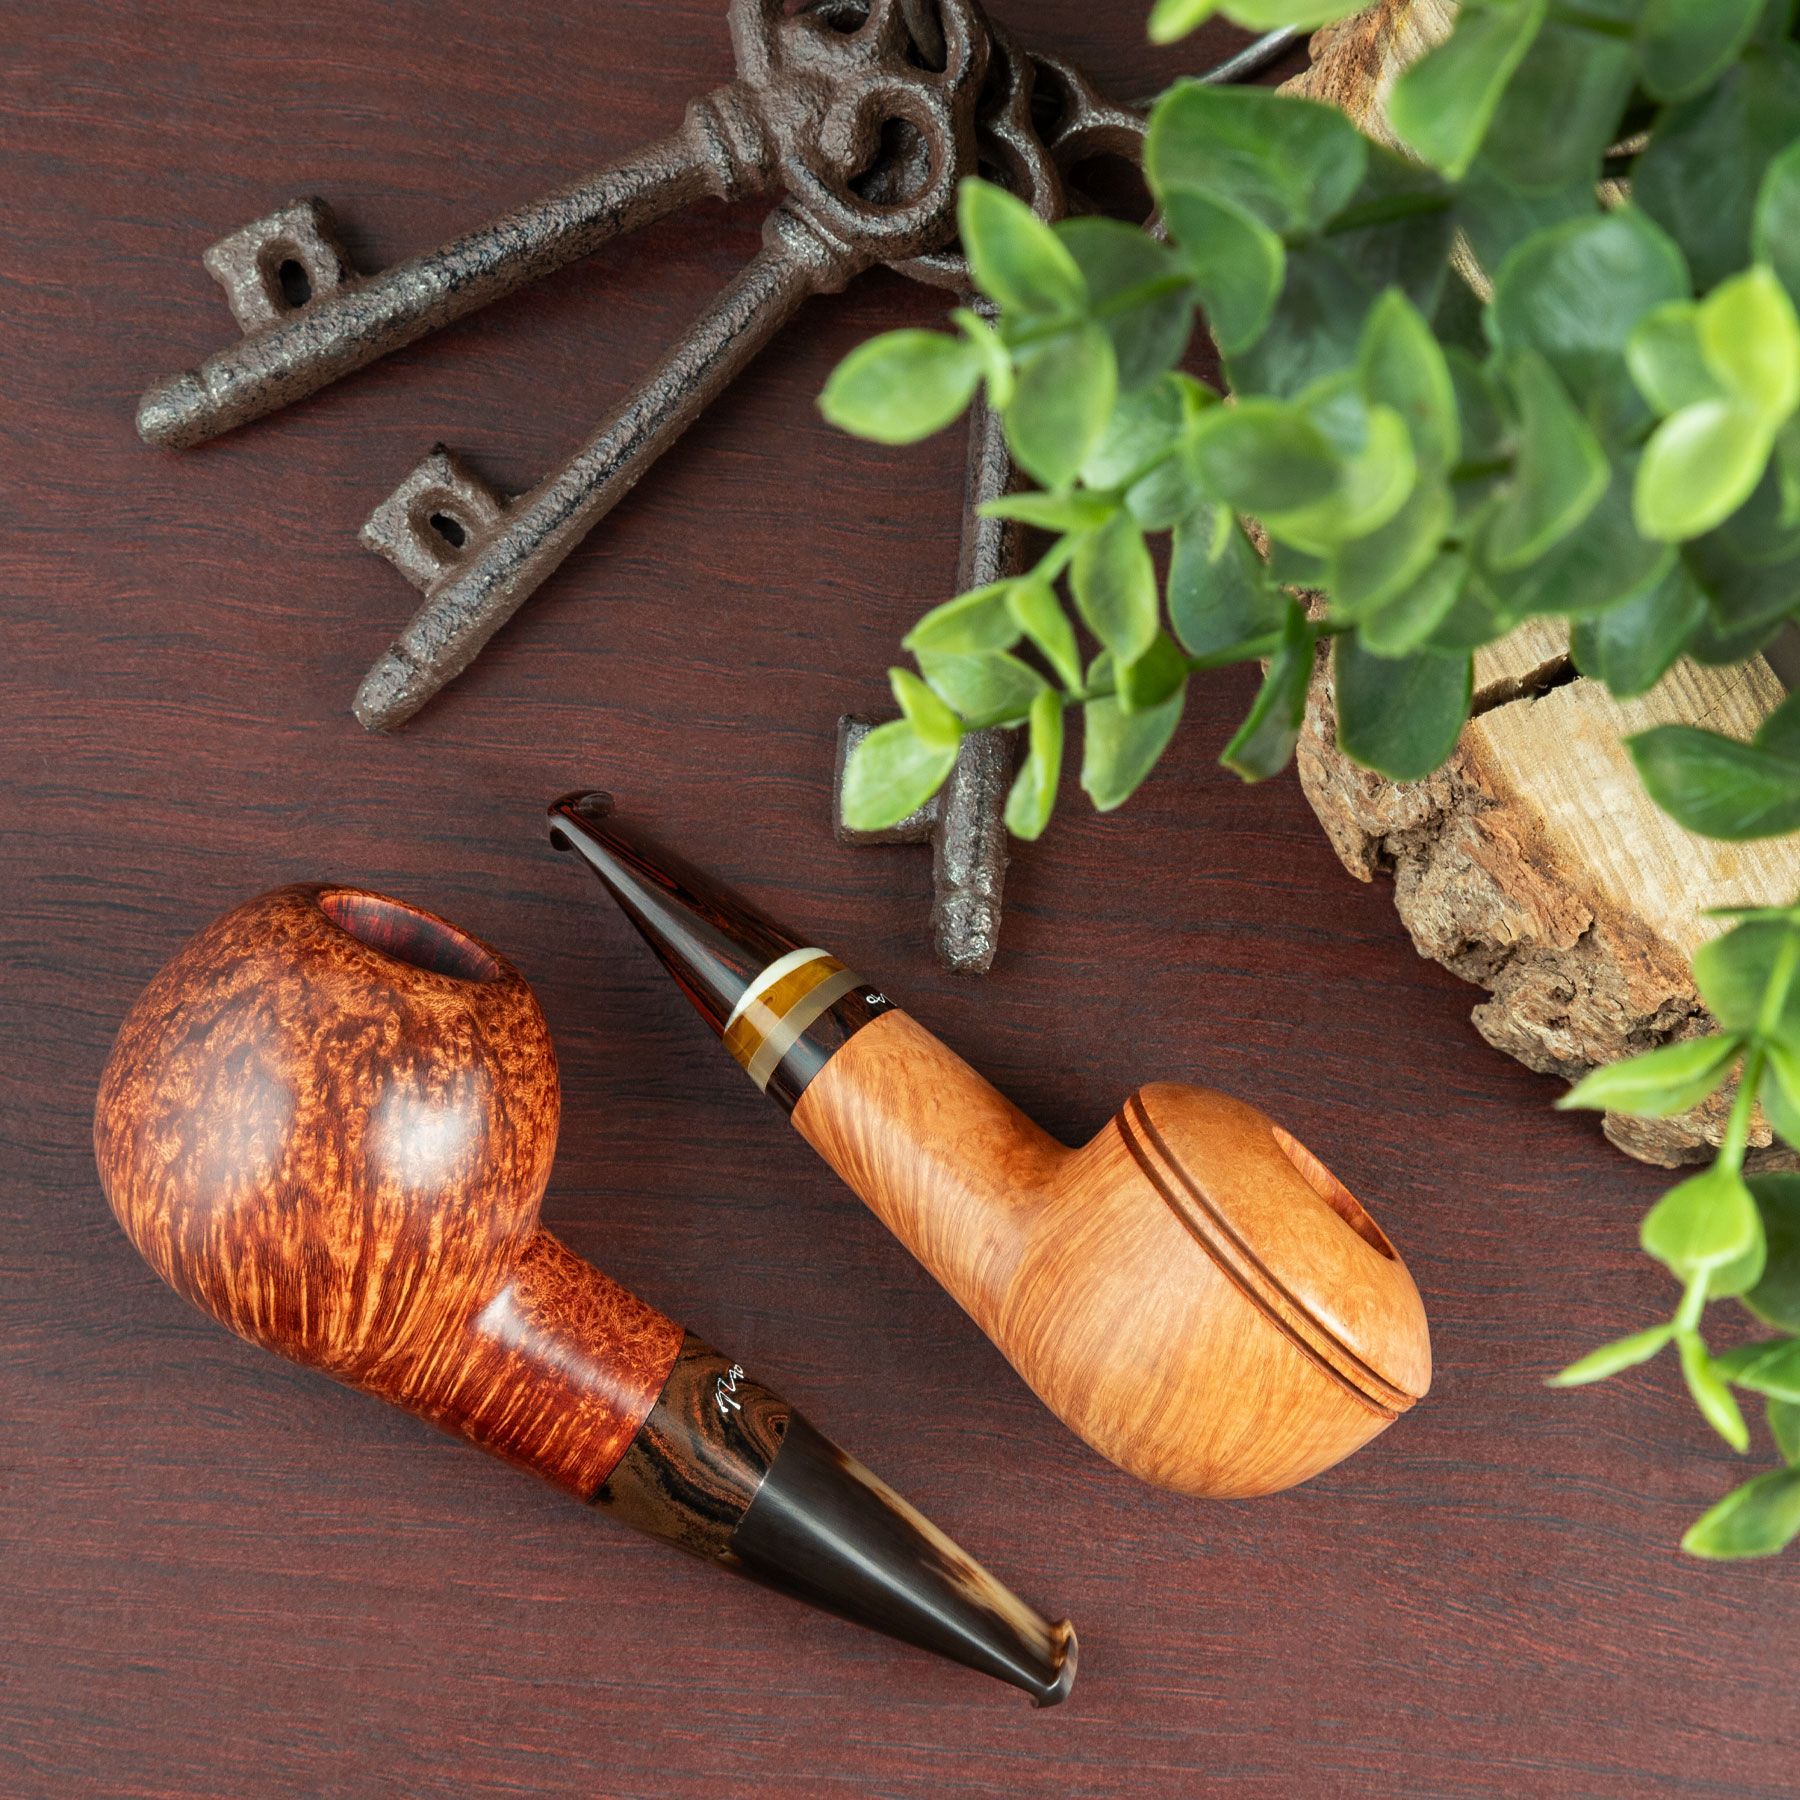 Smokingpipes.com on X: Two new pipes from Danish artisan Jens “Tao”  Nielsen today showcase his penchant for crafting compact, muscular pipes  with ample curves, including a smooth, squat Rhodesian, and a smooth